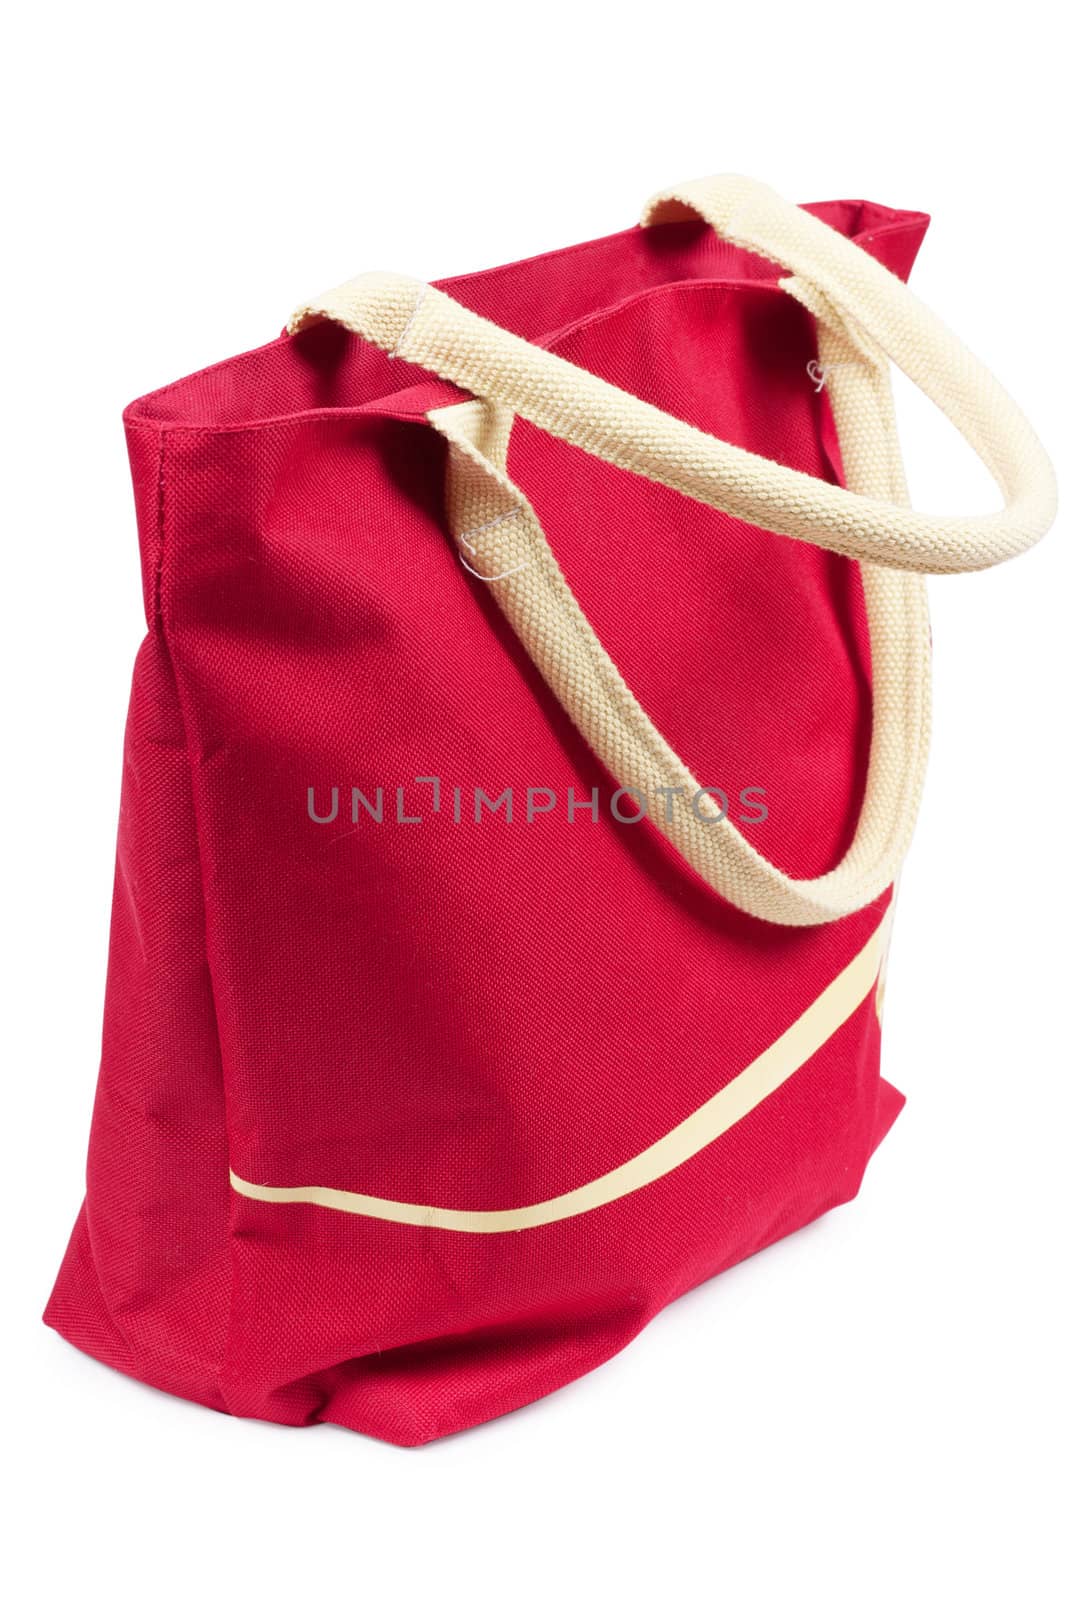 Red shopping bag isolated on the white